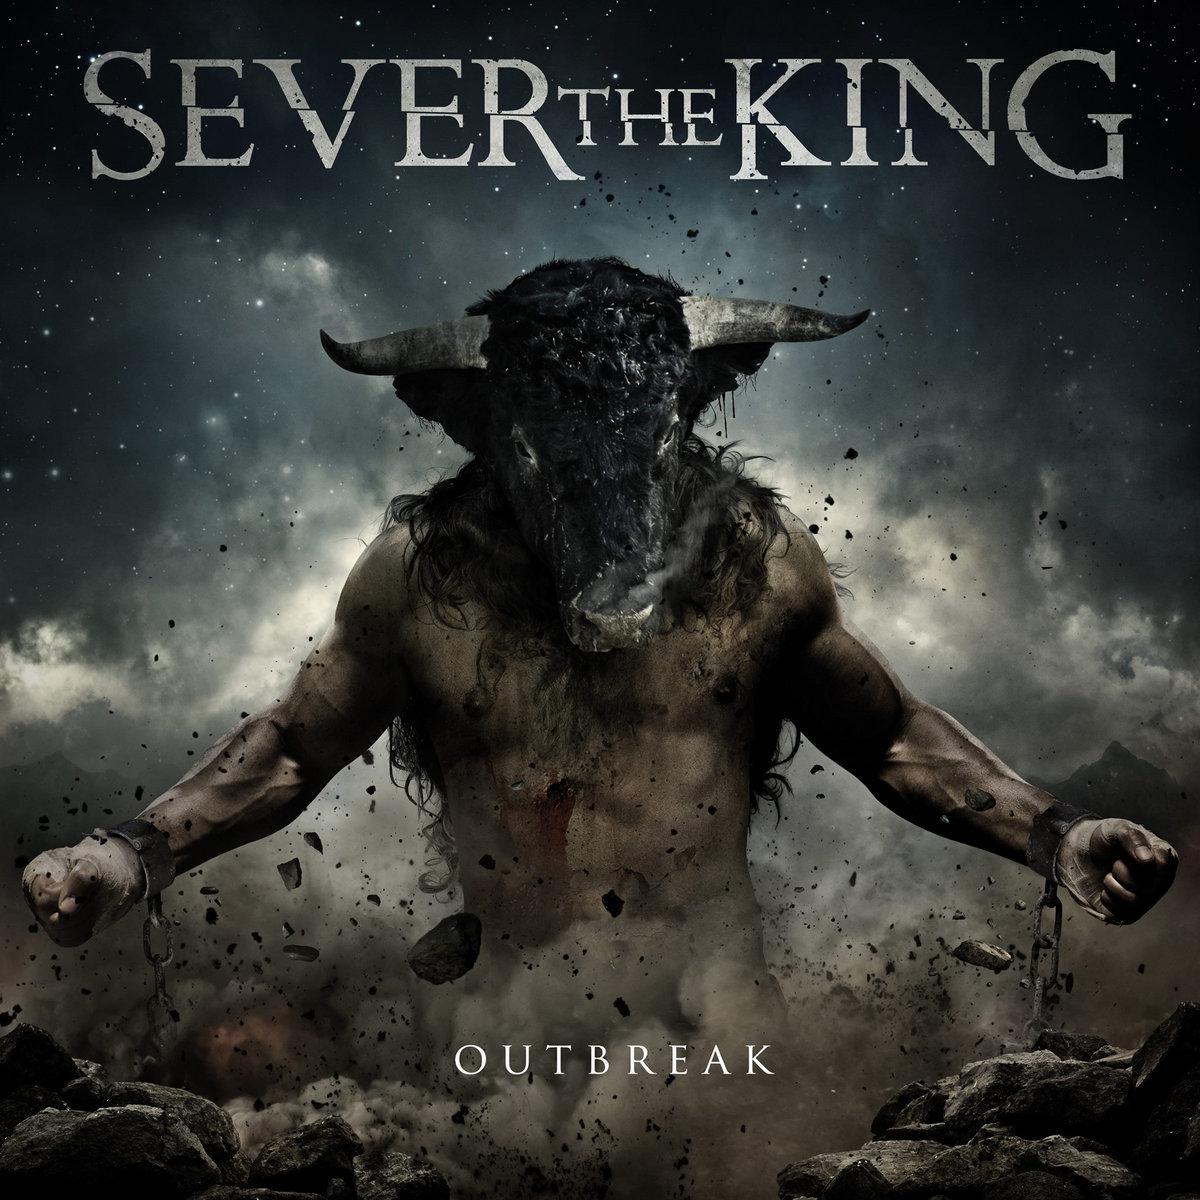 Sever the King